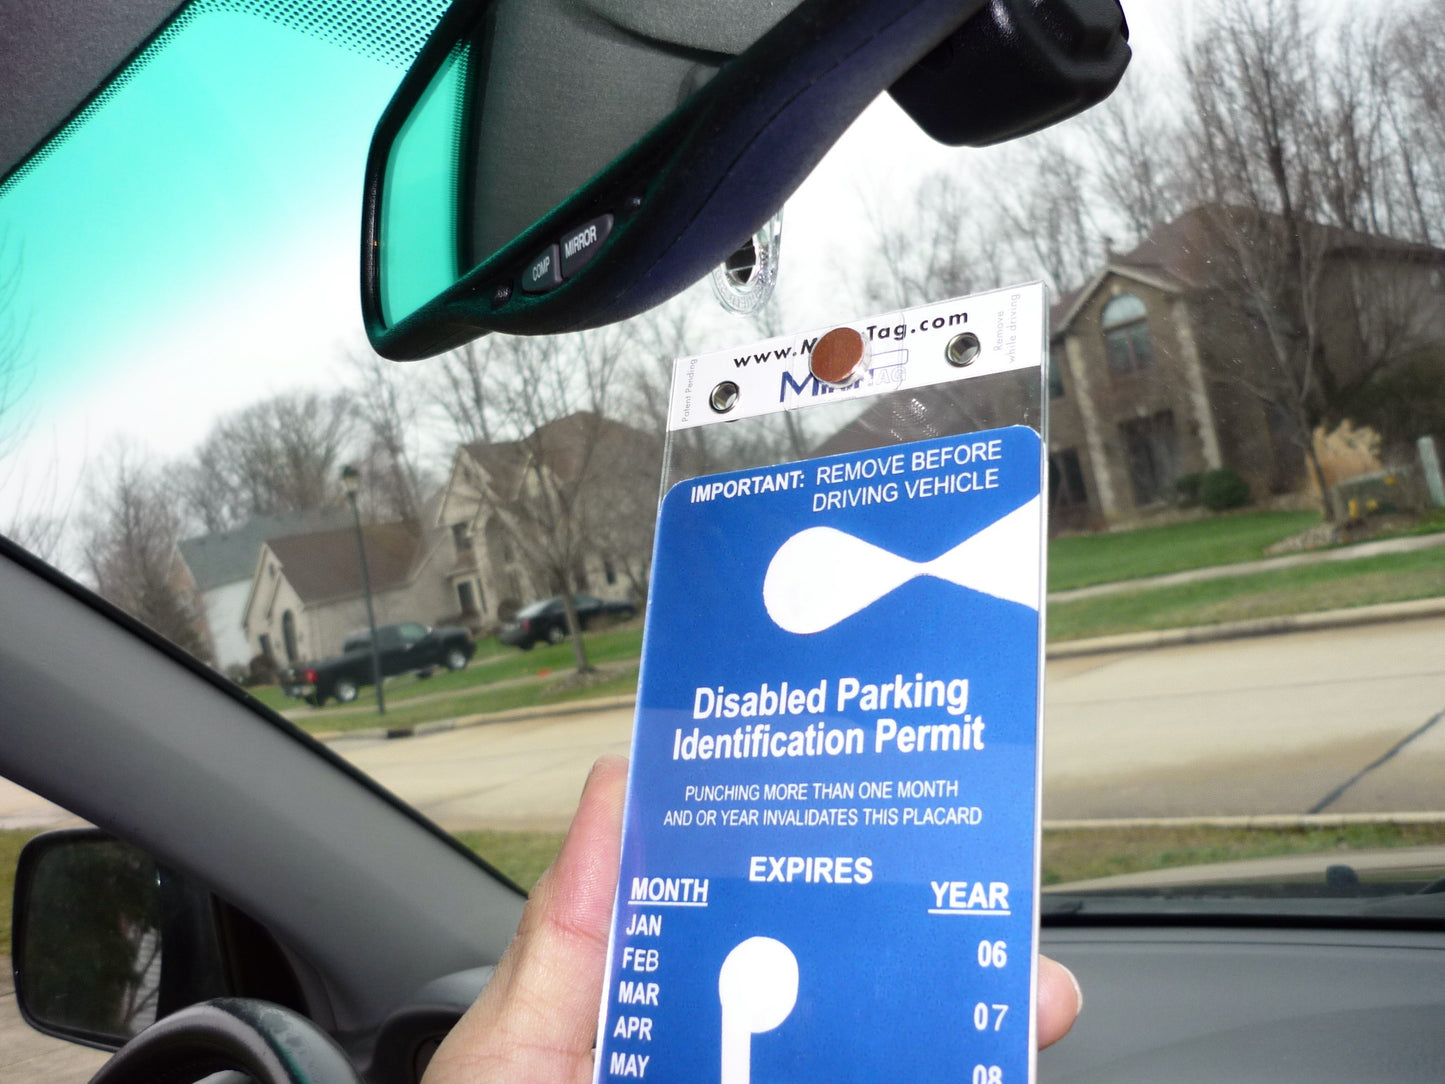 MirorTag Gold Plus™- Sturdy Handicapped Parking Placard Holder & Protector. Fits NC state long size tag. Sun & Cold resistant. Magnetically attach & Detach your Permit. Tag size: 10.75in x 3.625in or wider. Made in USA